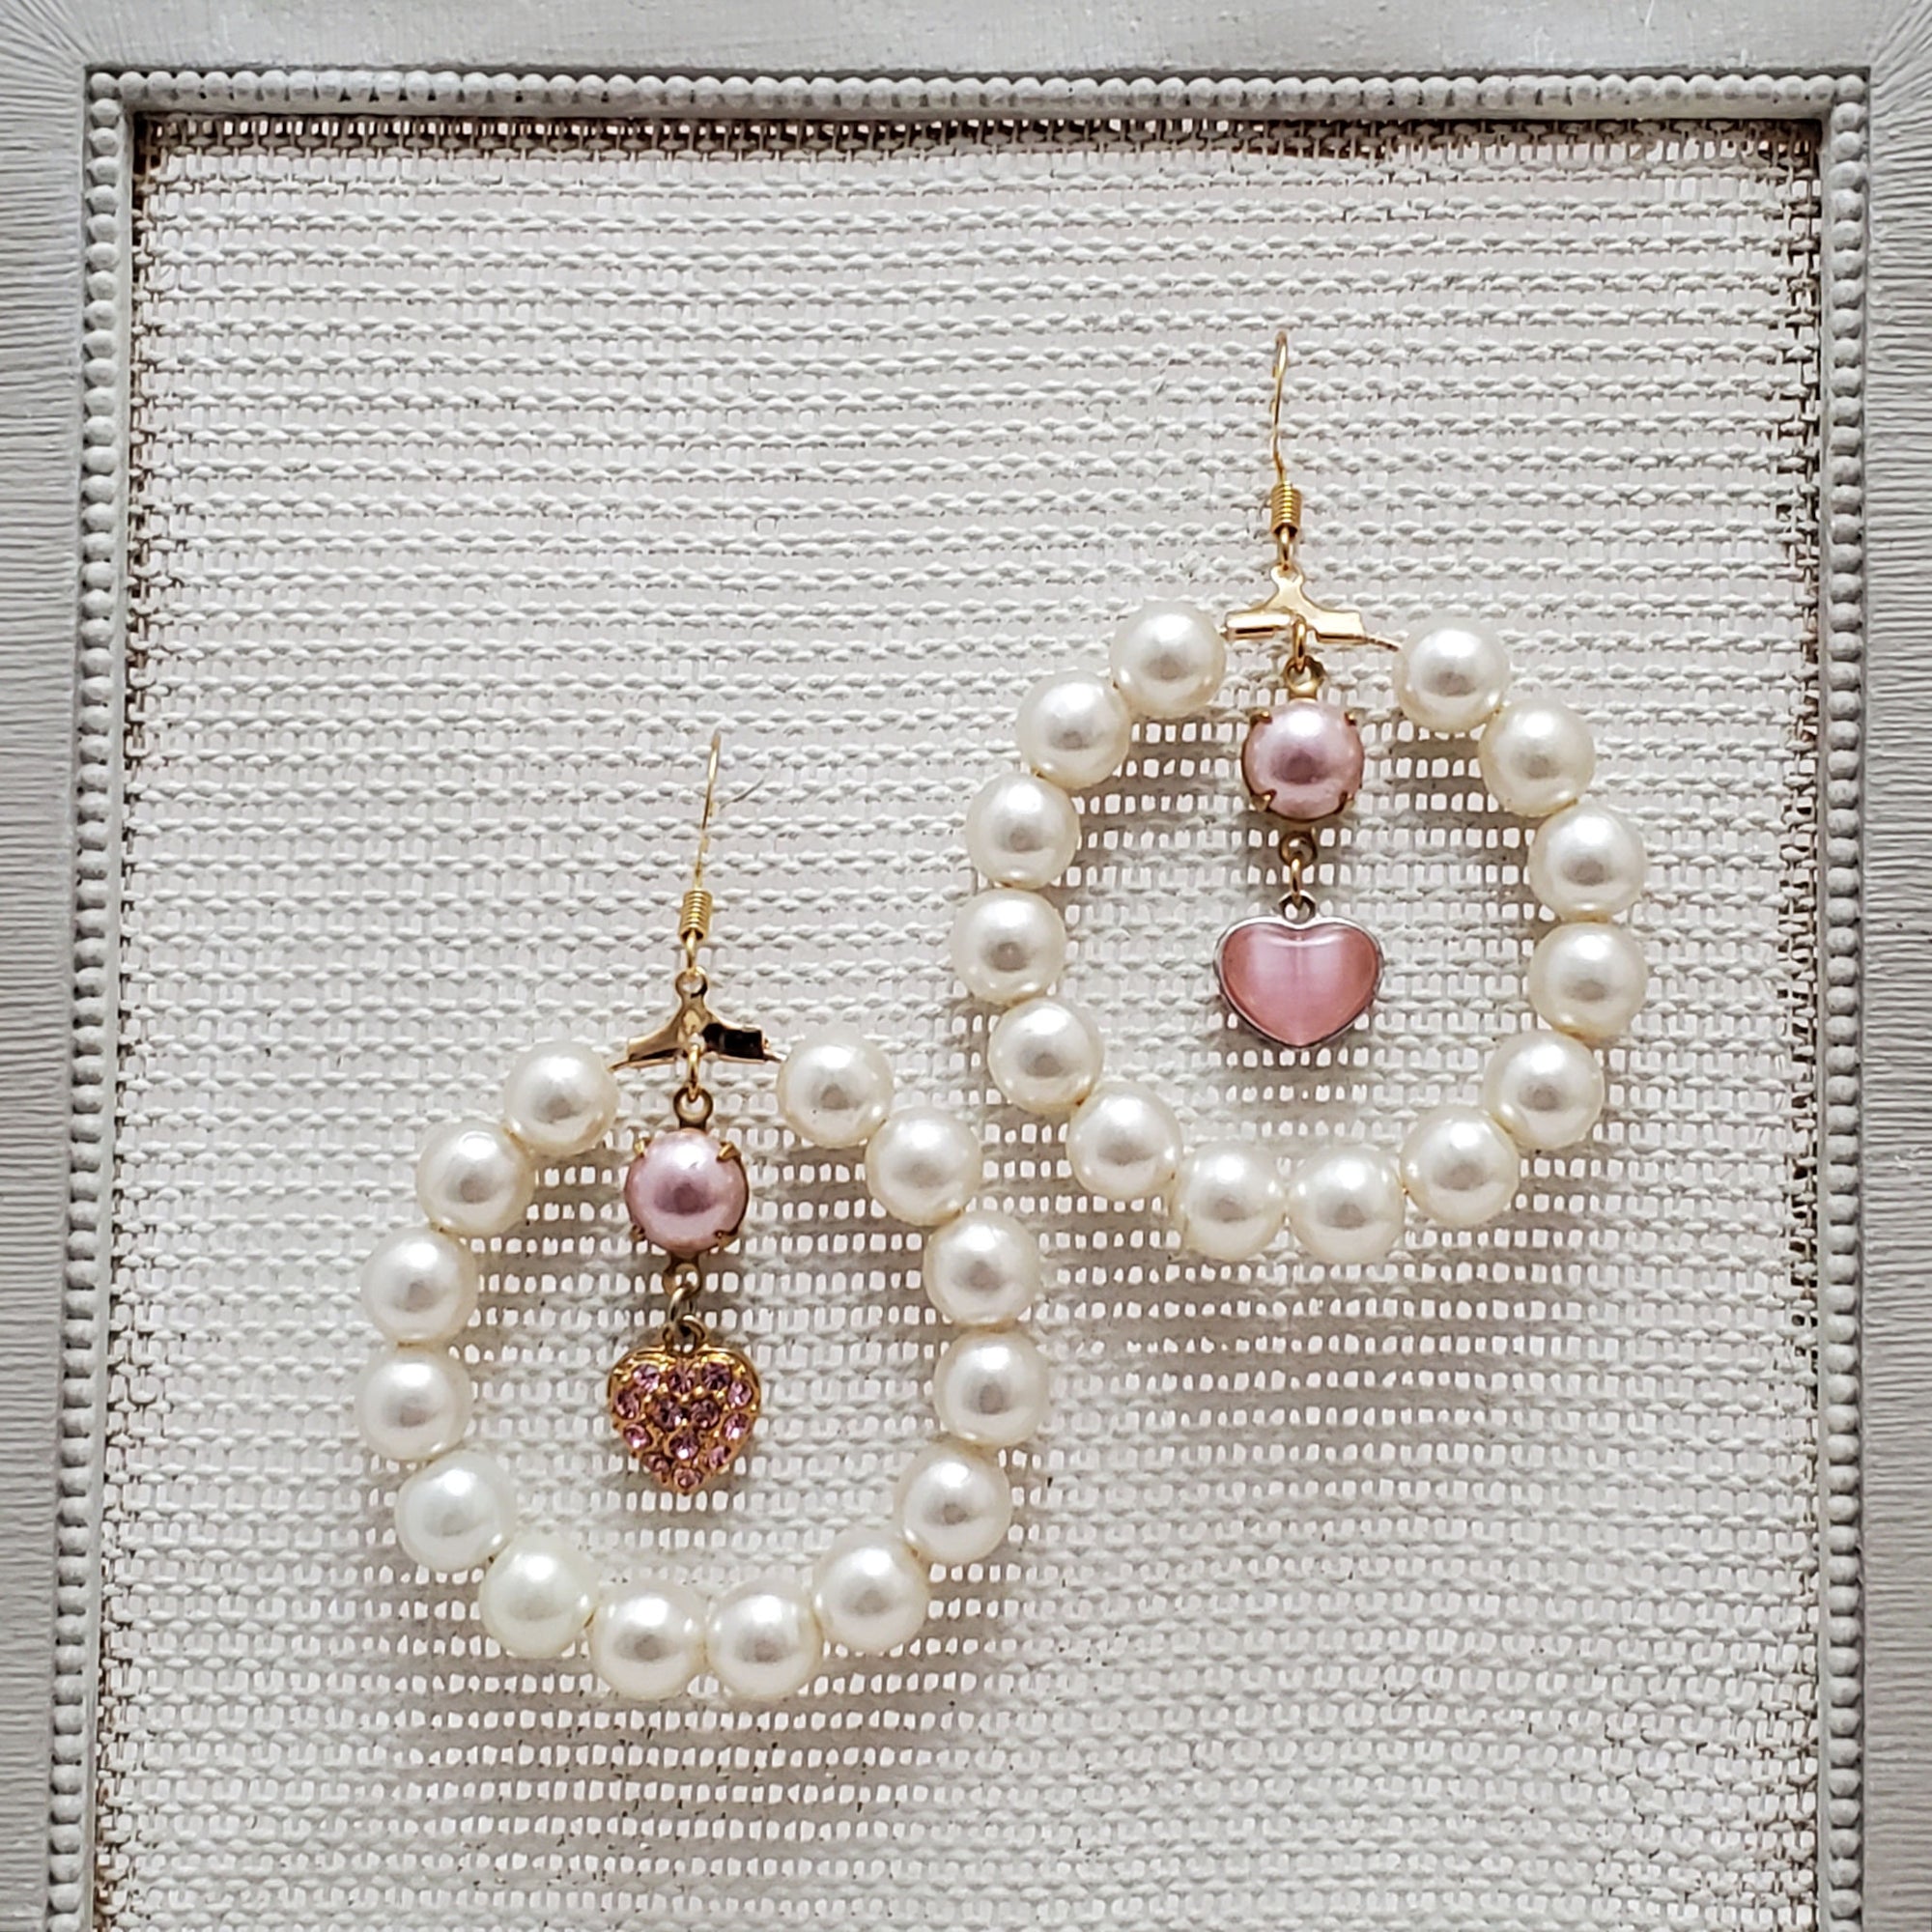 Large Faux Pearl Hoop Earrings with Pink Heart Charms